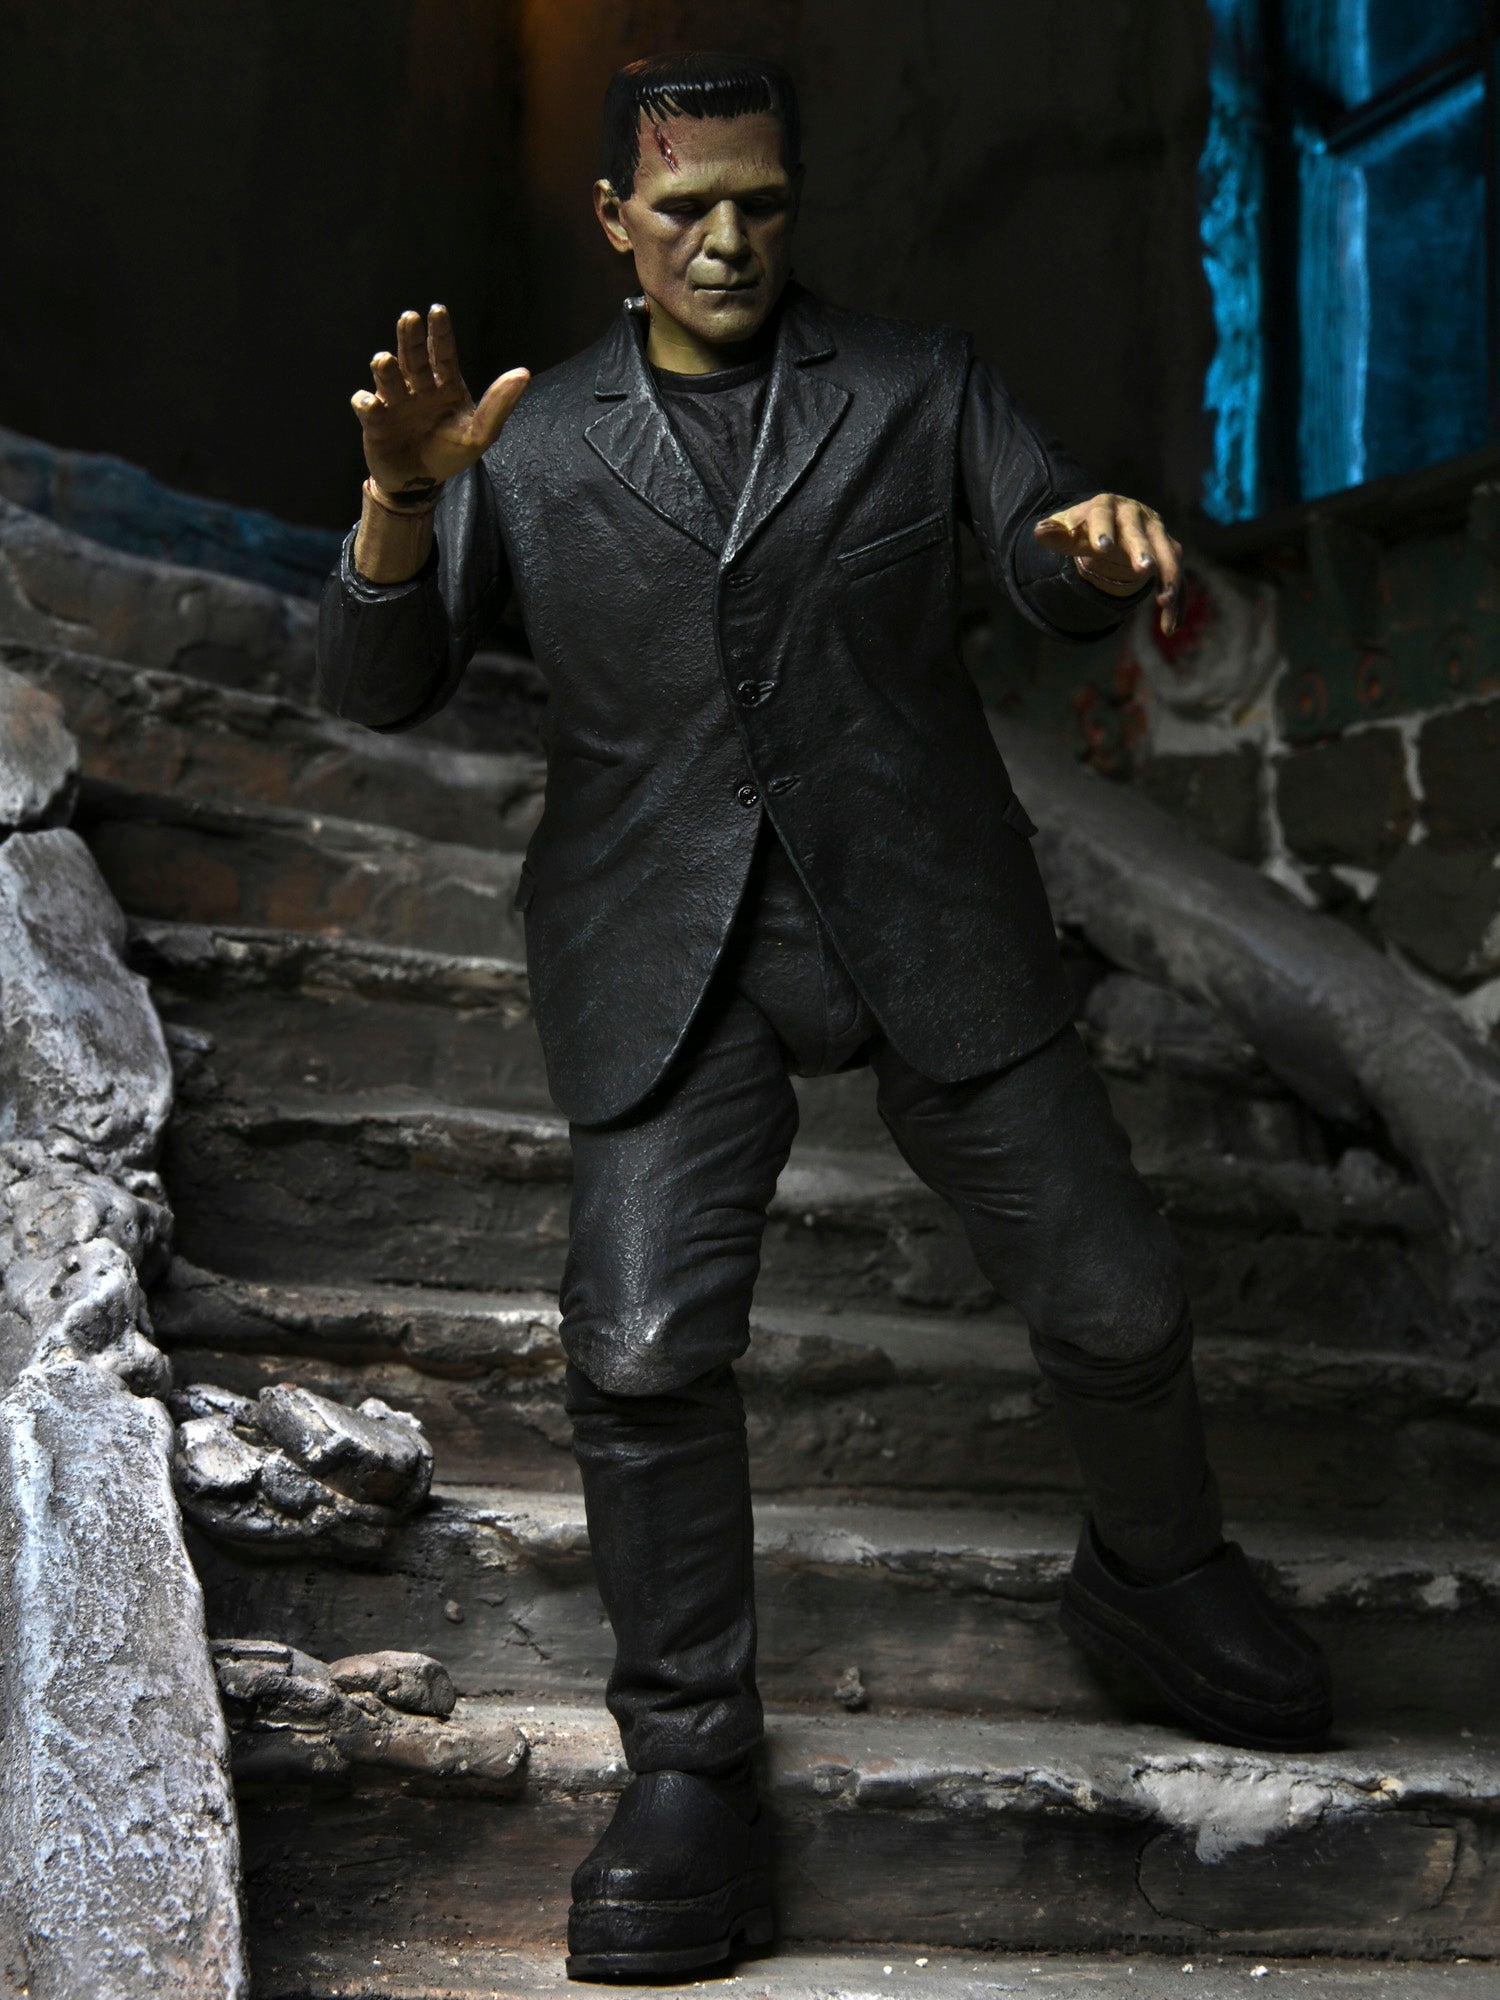 NECA - Universal Monsters - 7" Scale Action Figure - Ultimate Frankenstein's Monster (Color) - costumes.com